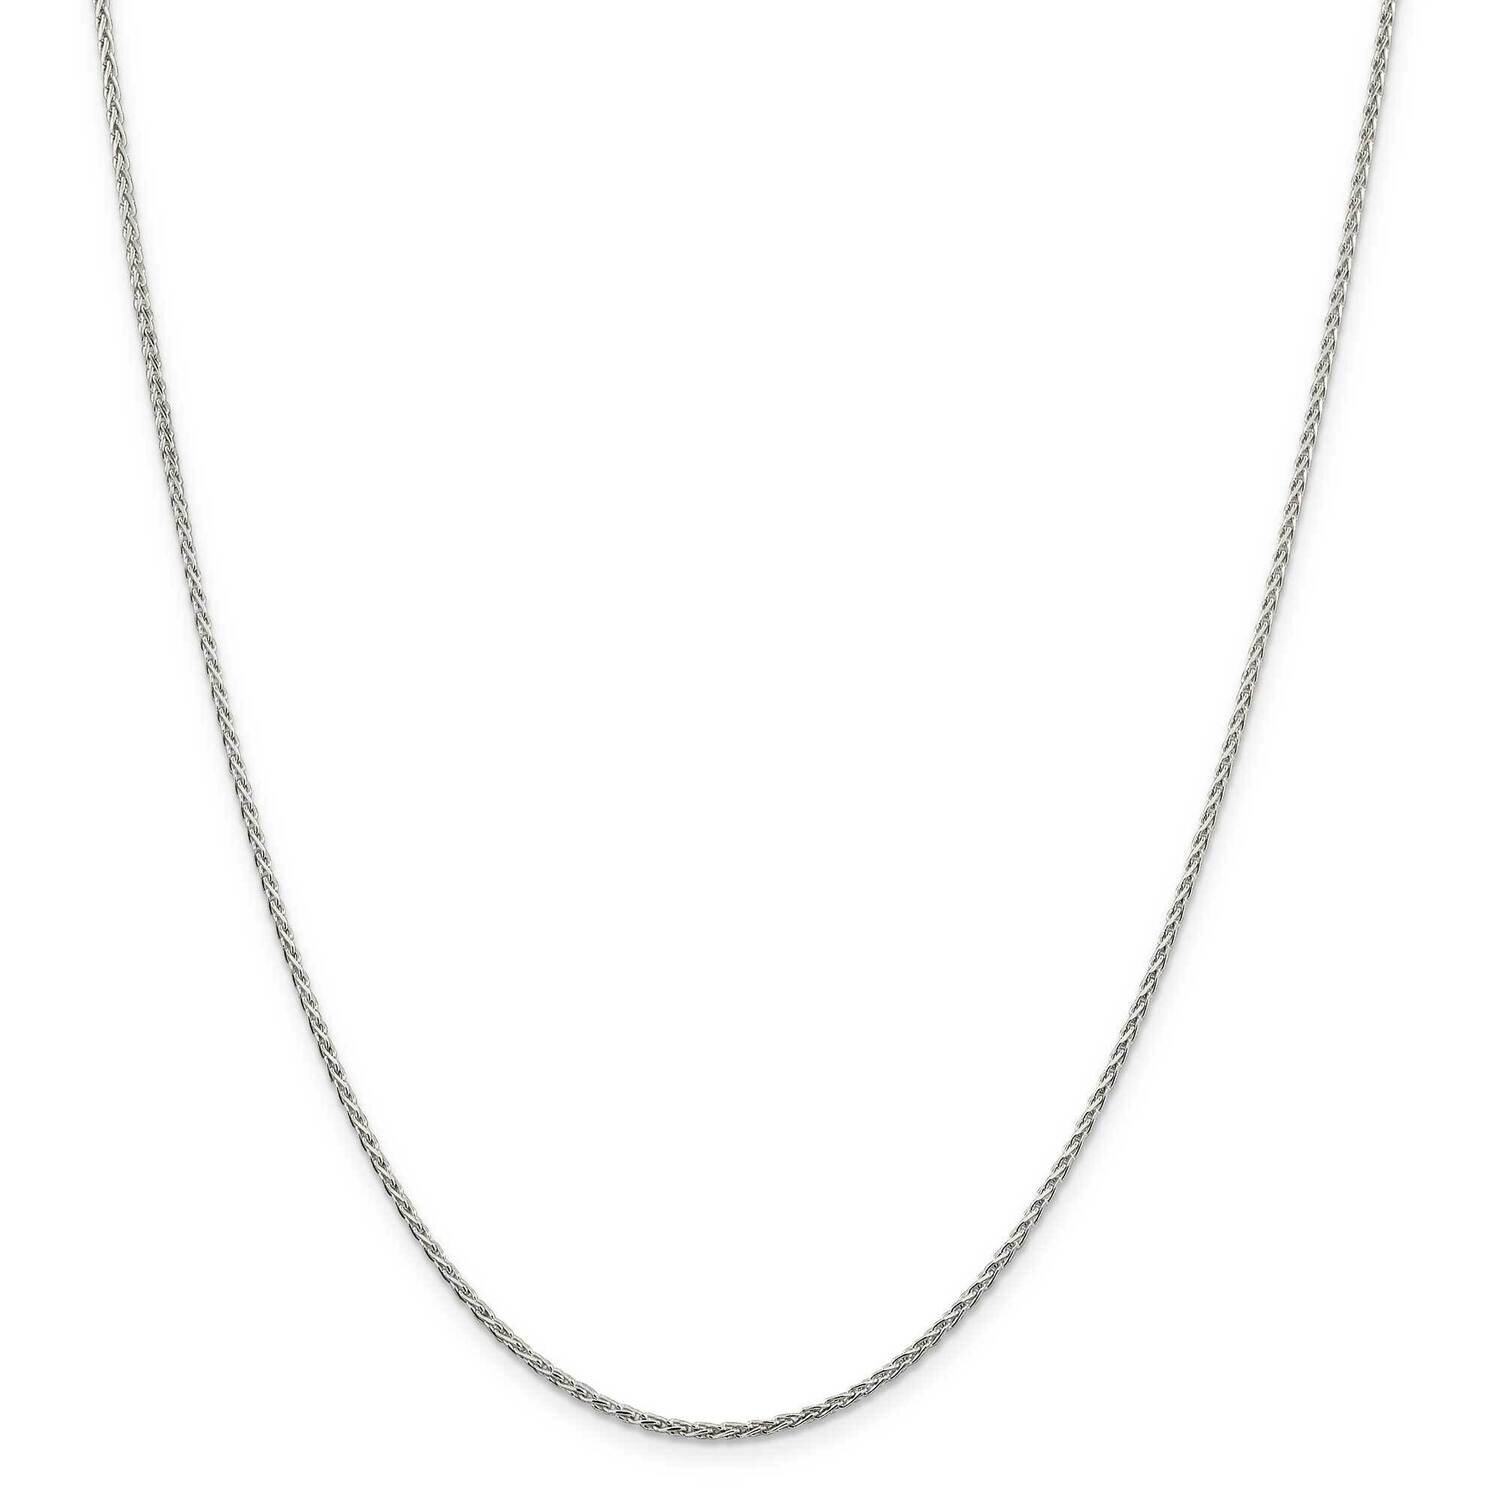 1.5mm Diamond-Cut Spiga Chain with 2 Inch Extender 18 Inch Sterling Silver QDS045E-18